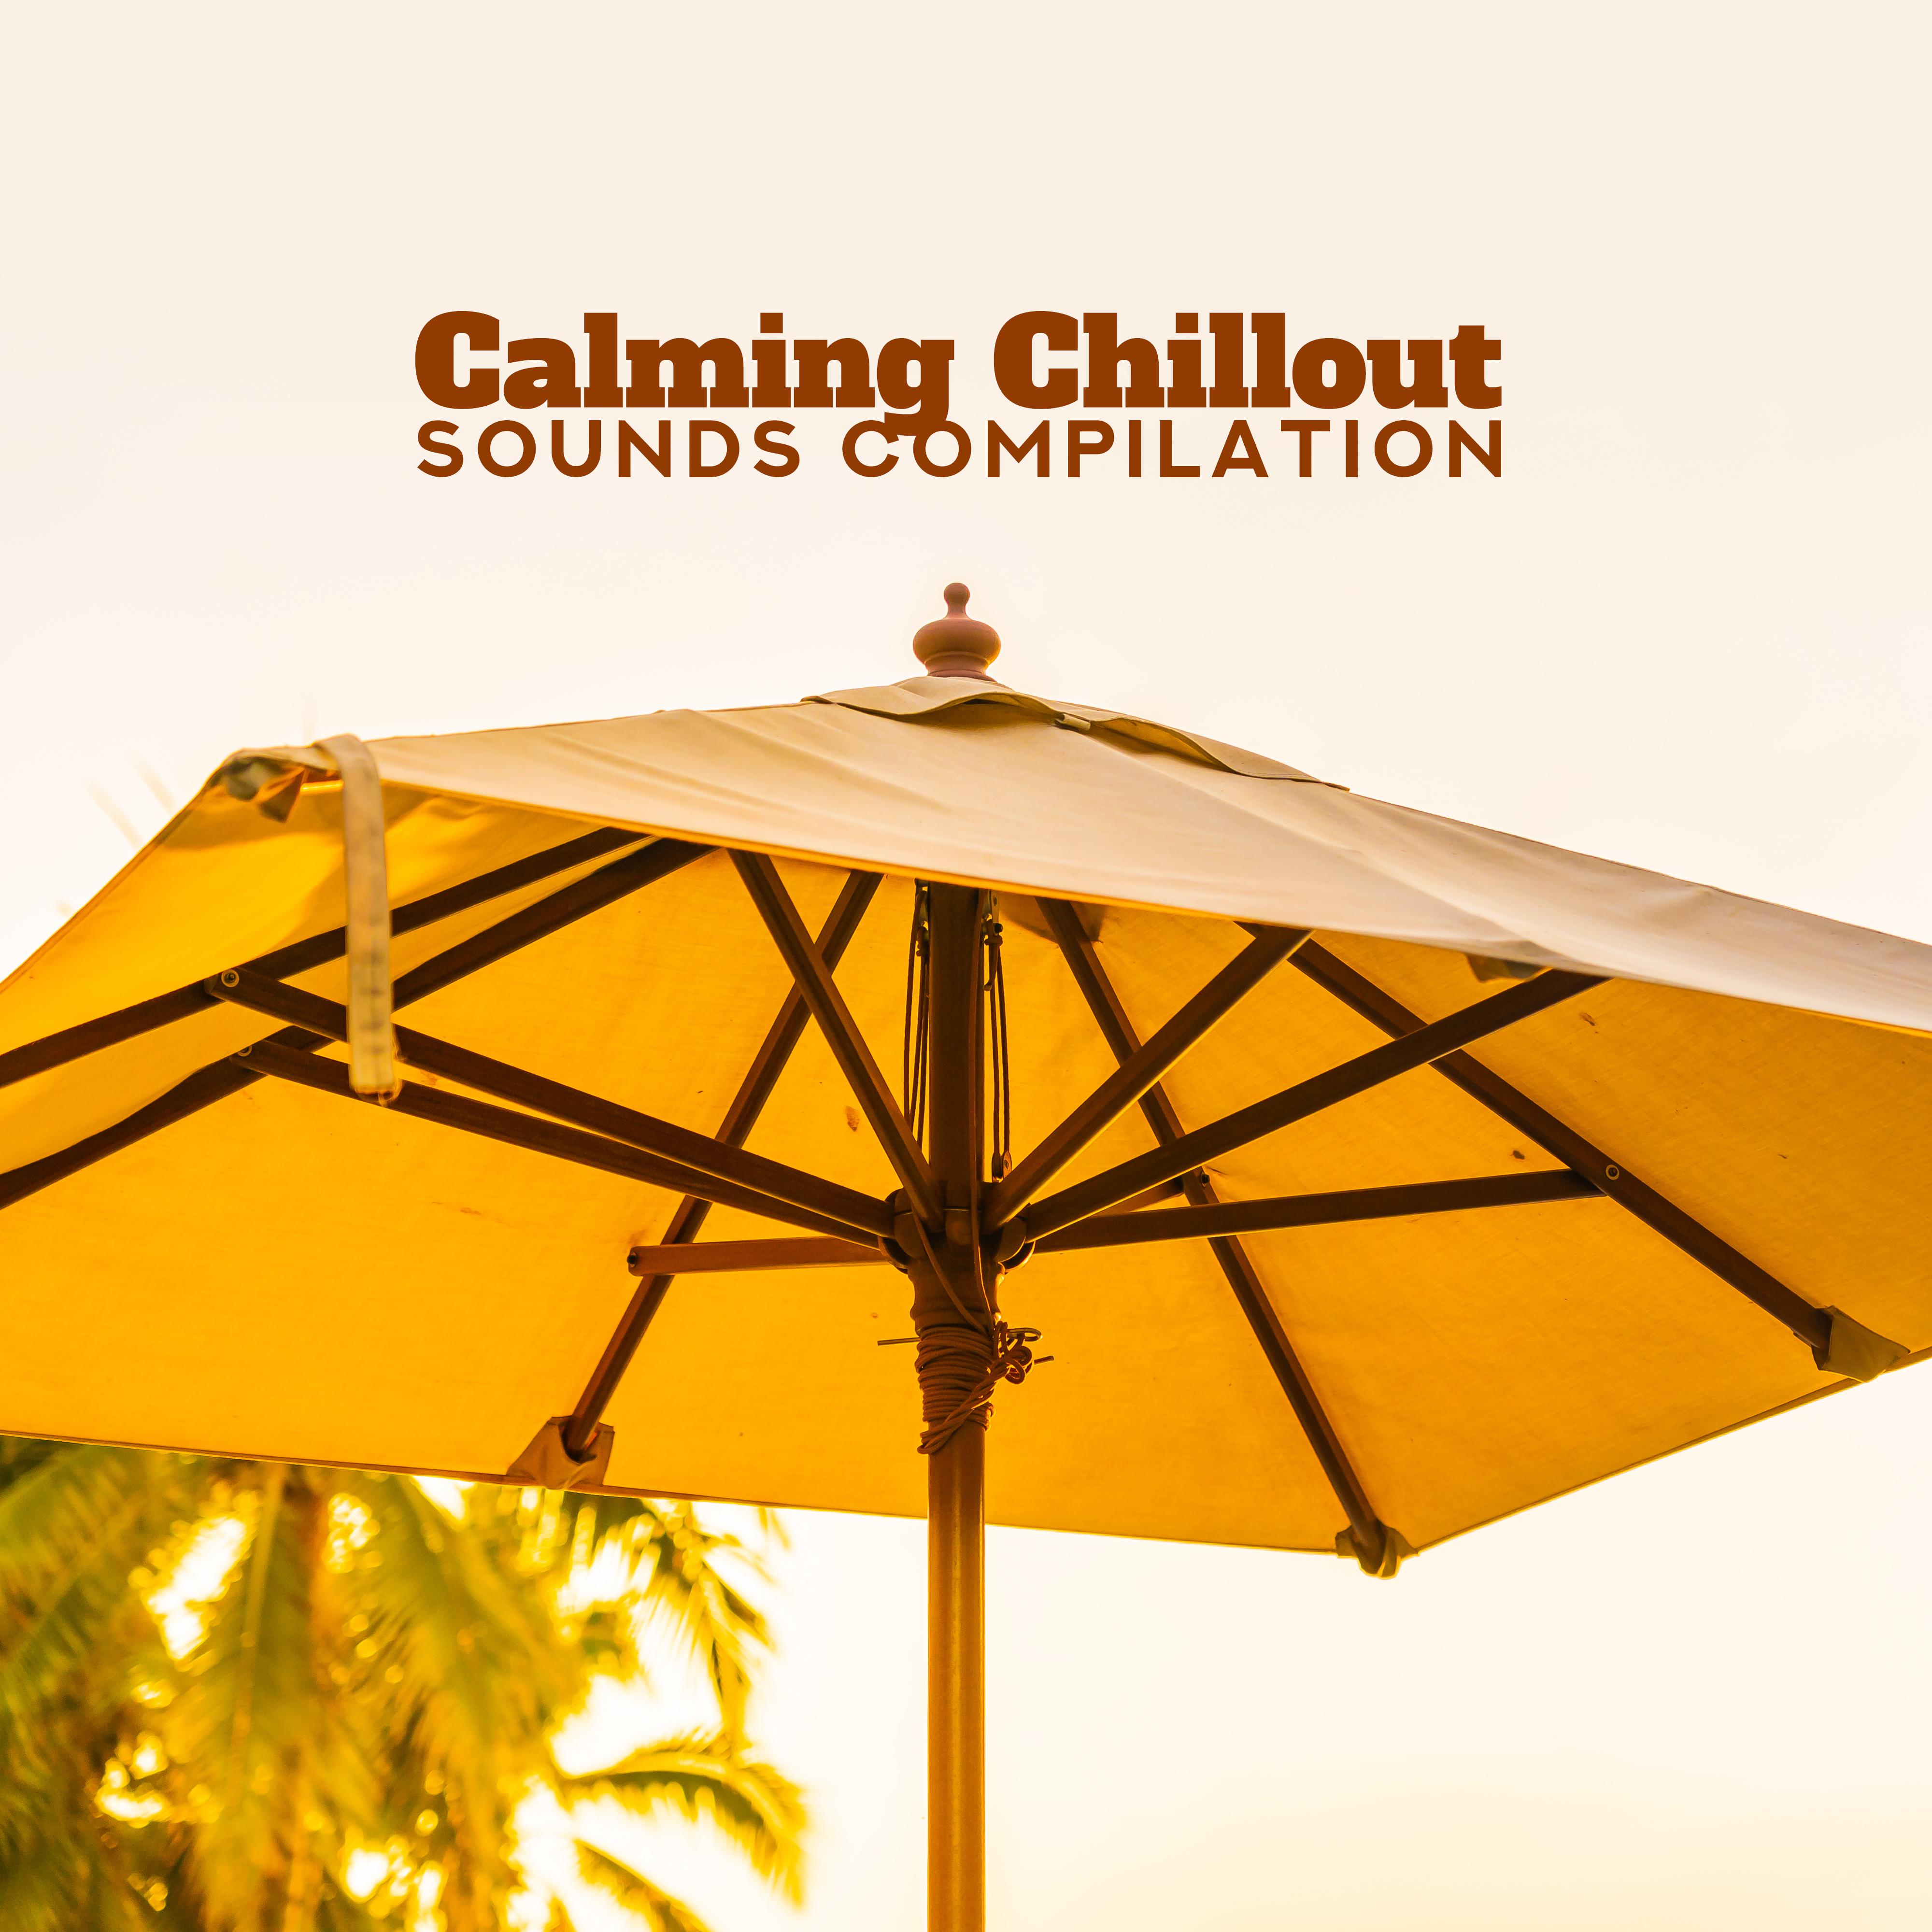 Calming Chillout Sounds Compilation  15 Soft Electronic Beats for Total Relax, Calm Down, Stress Relief, Rest  Sleep Melodies